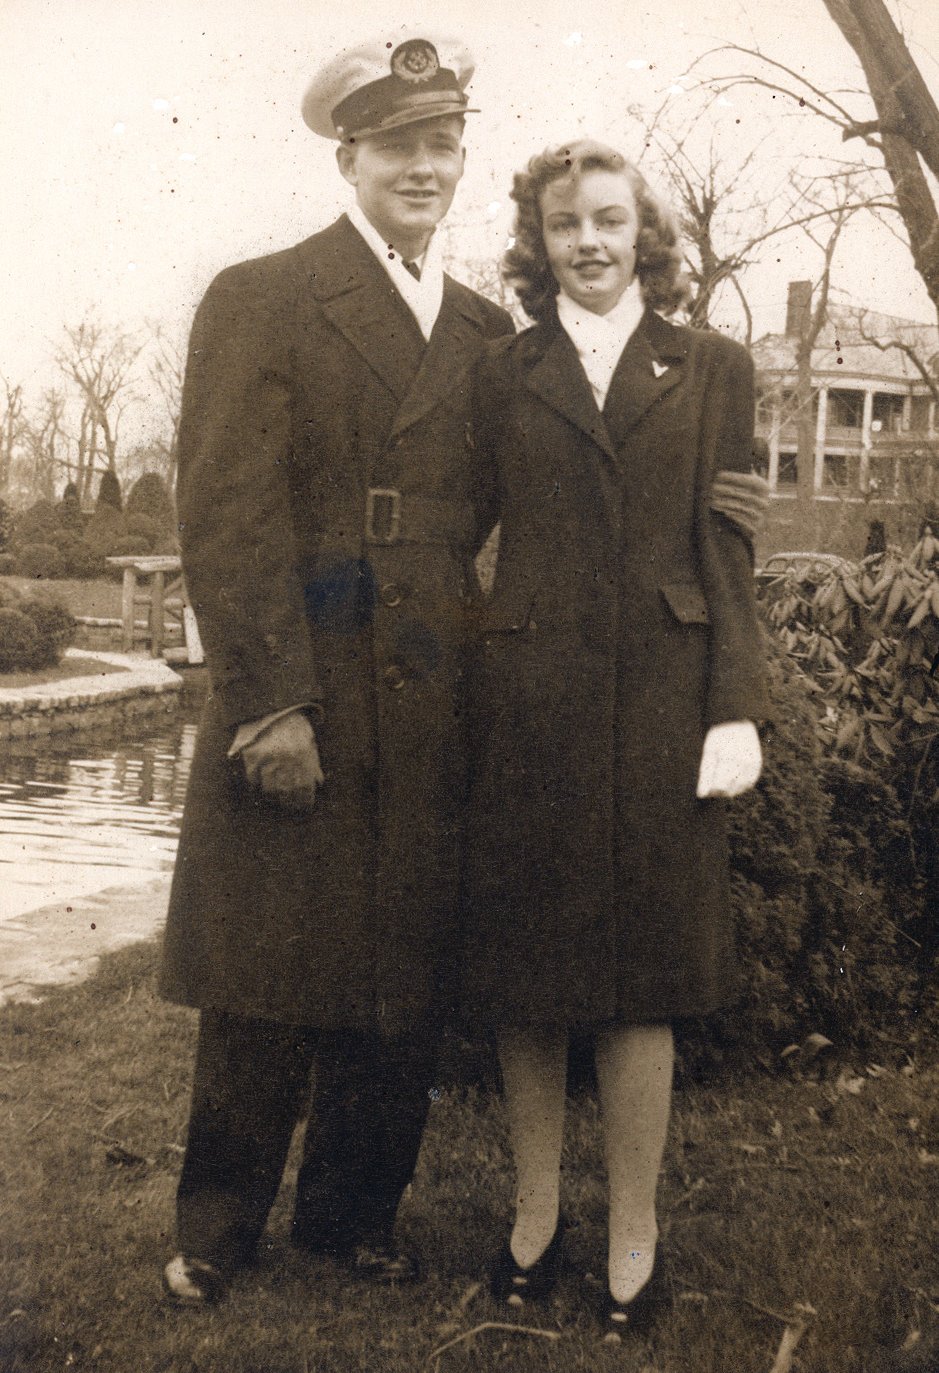 SHE WANTED HIM AT HOME: Harry and Jackie before he left to serve in the Merchant Marines. When he returned after WWII she said she would marry him only he left the Merchant Marines.